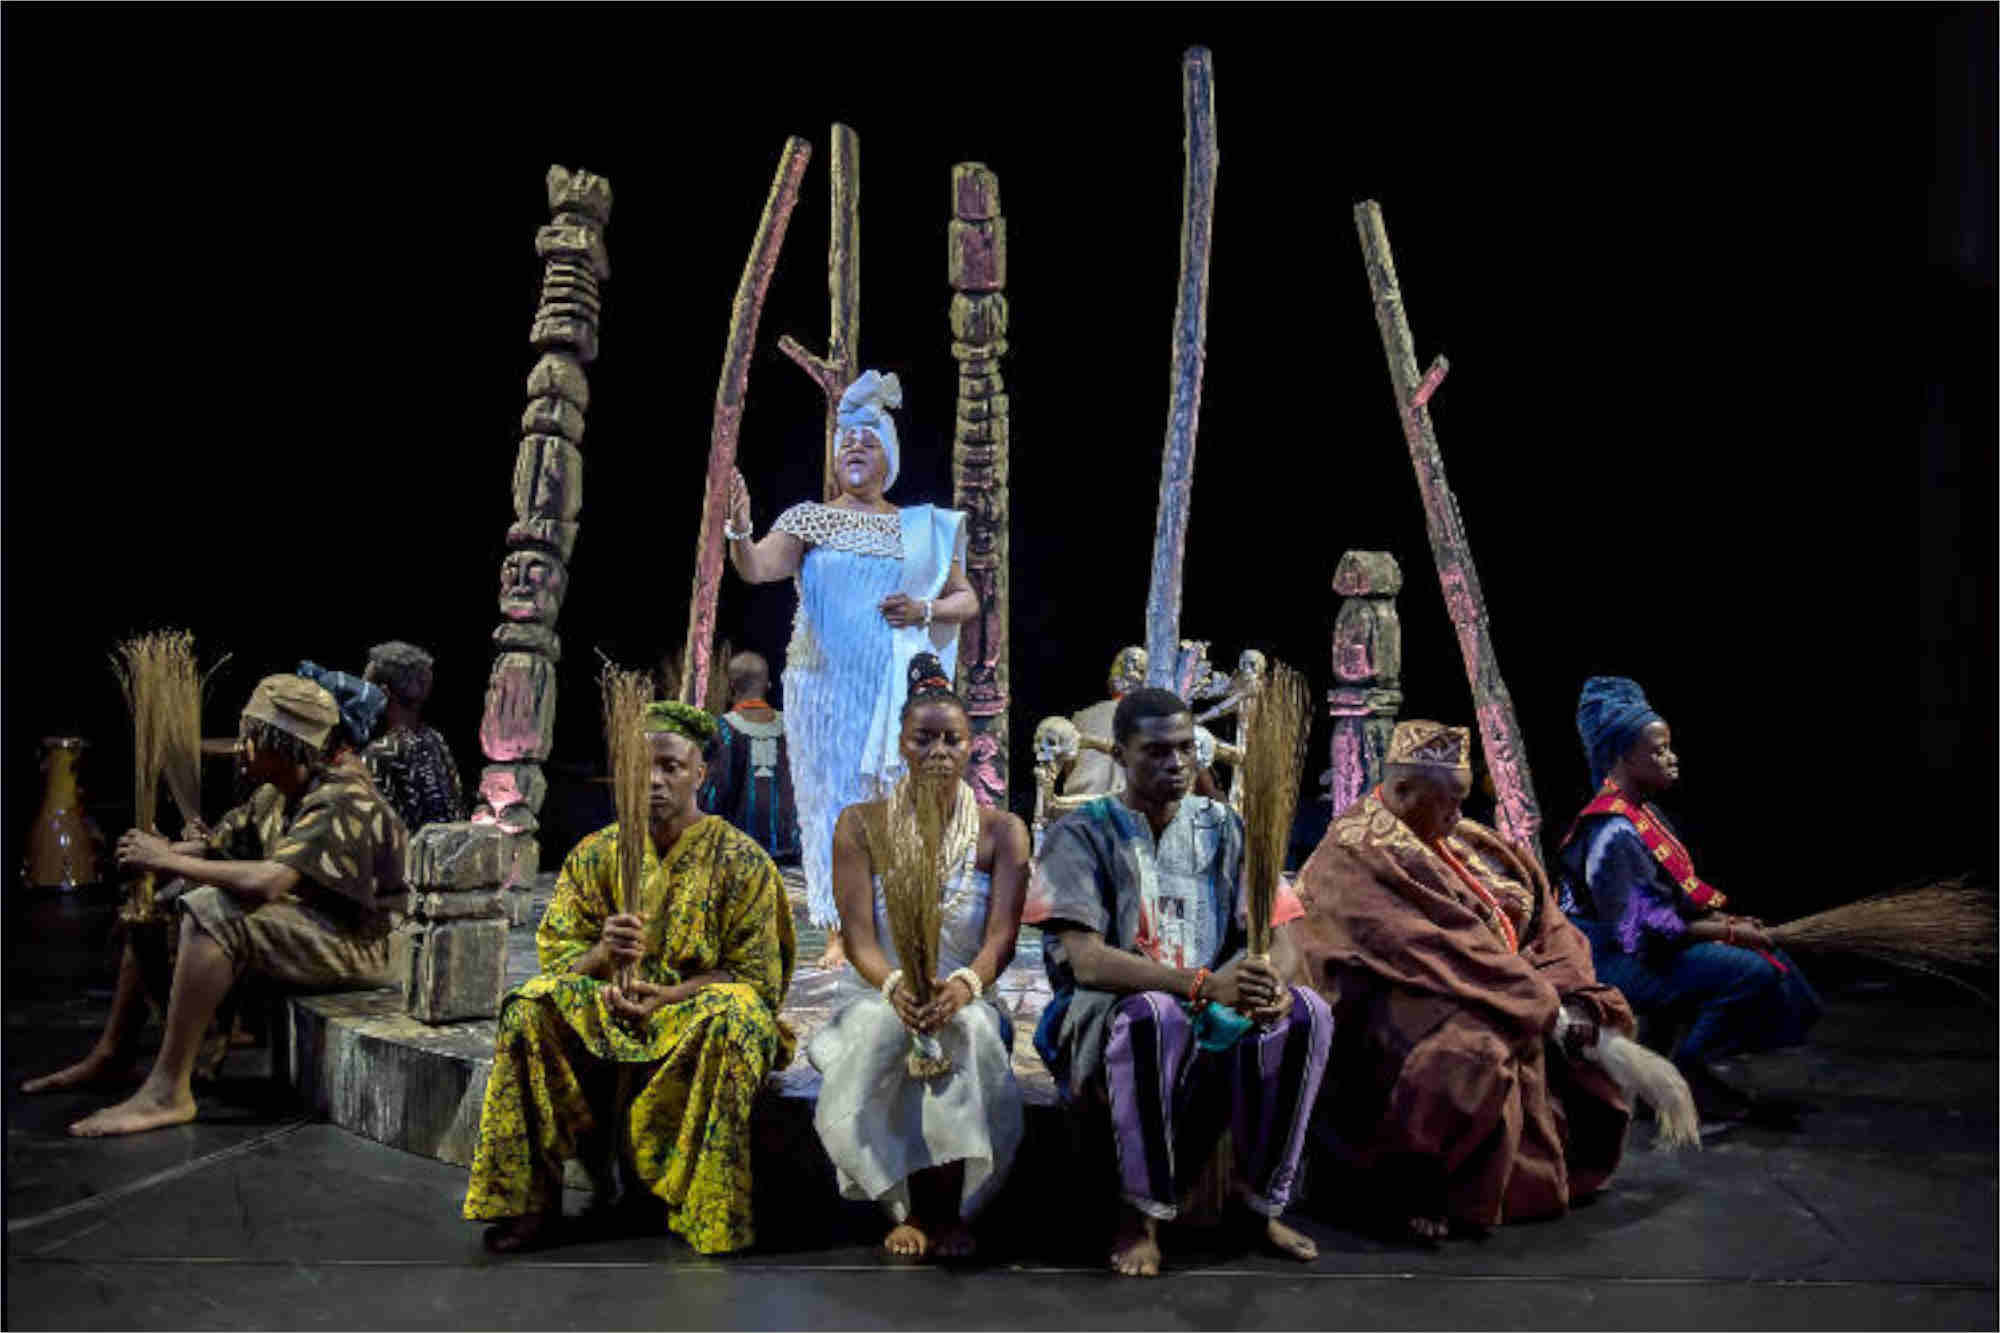 Performance of Duchess of Malfi. A row of performers sat on a stage with a stood female performer behind them. The stage is also covered in trees. All performers are dressed in traditional African Clothing